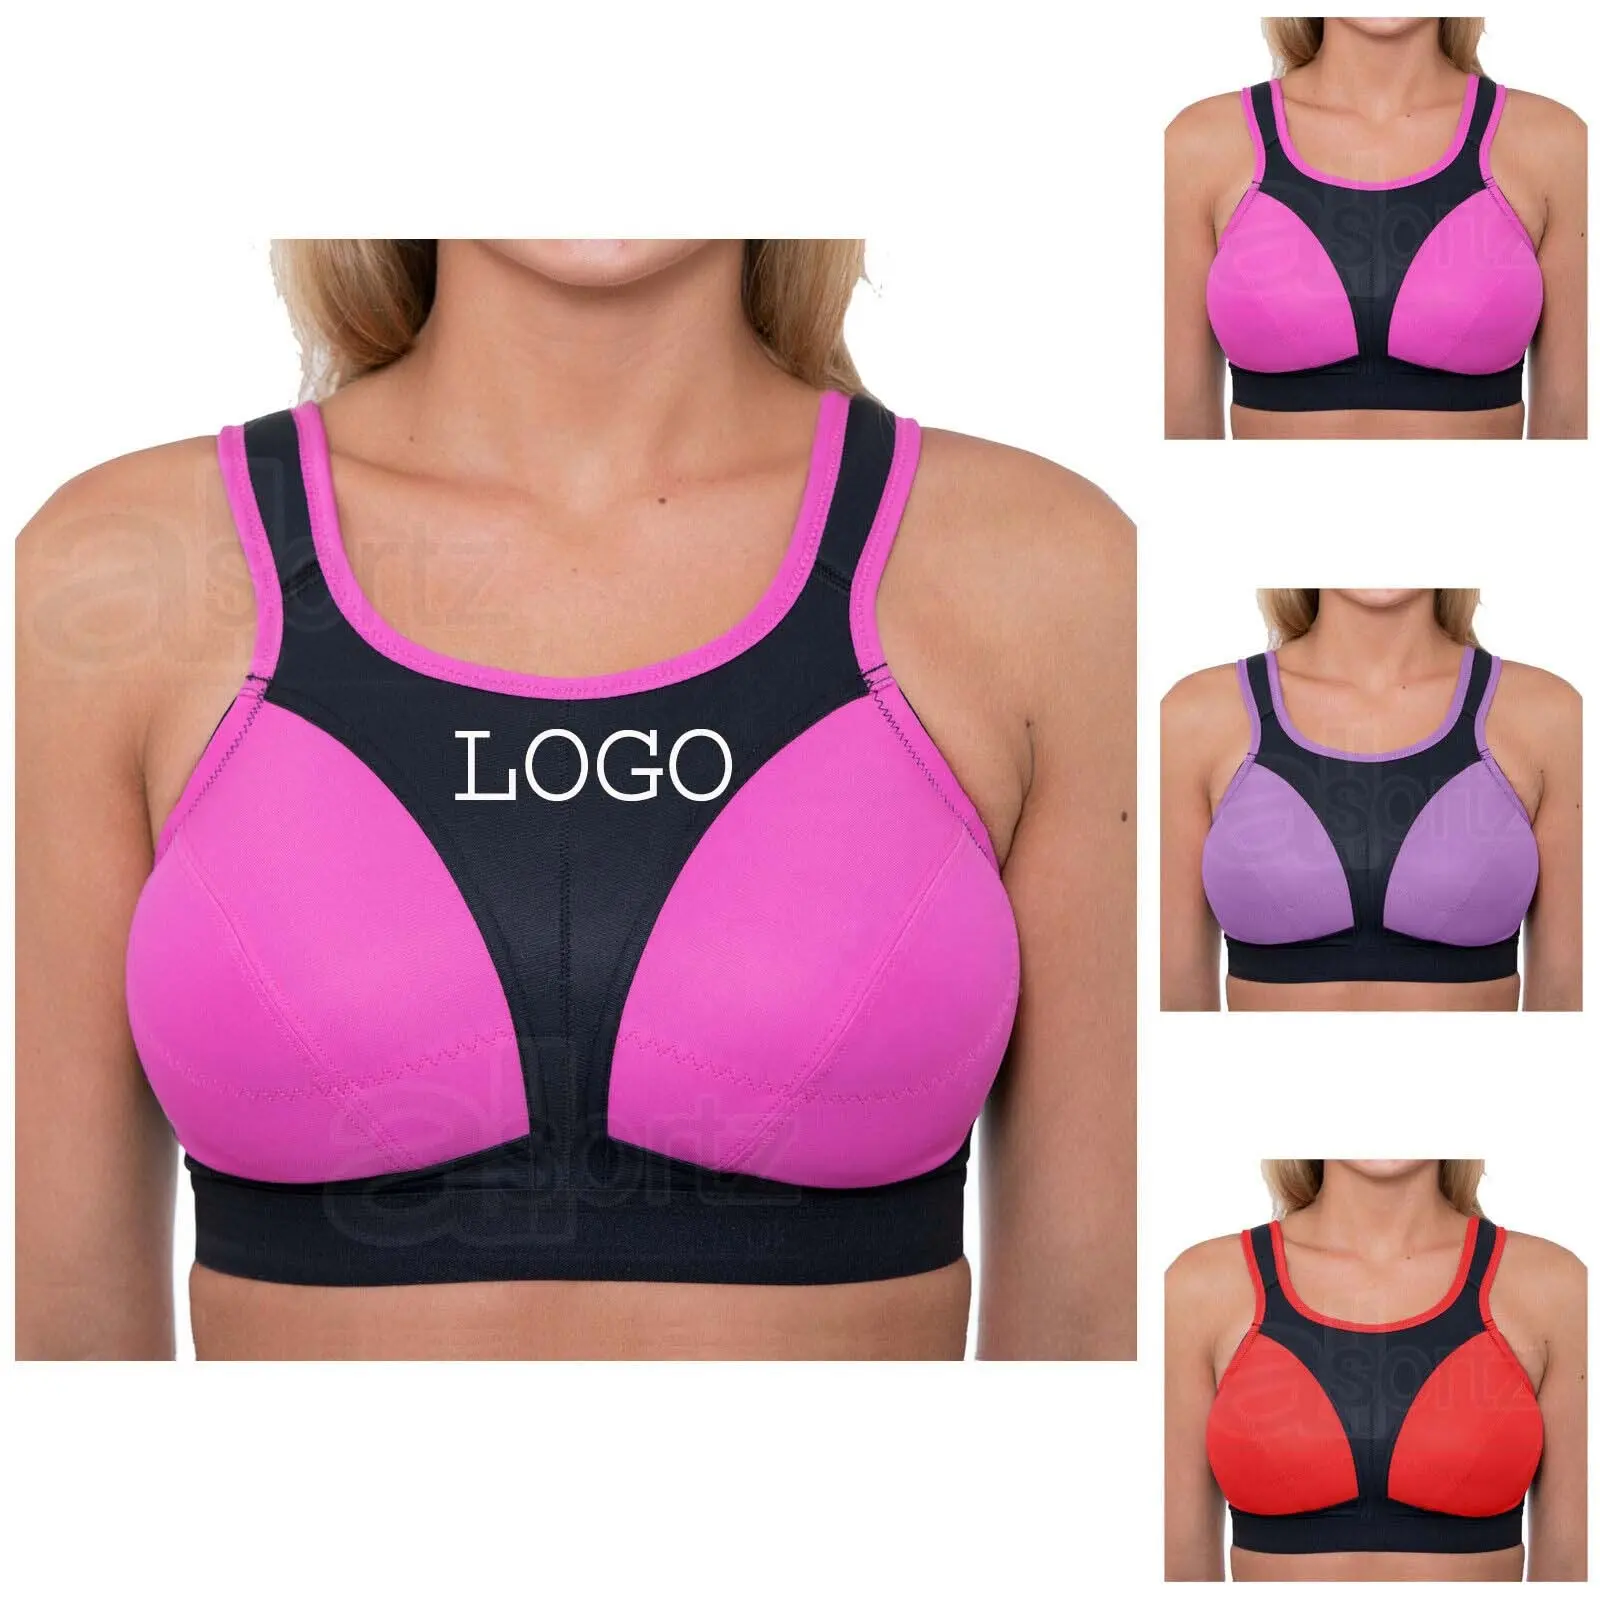 Factory Cheap top Quality women girls Exercise Athletic Sports fitness Bras Top Vest Bra Women undergarments gym crop trunk